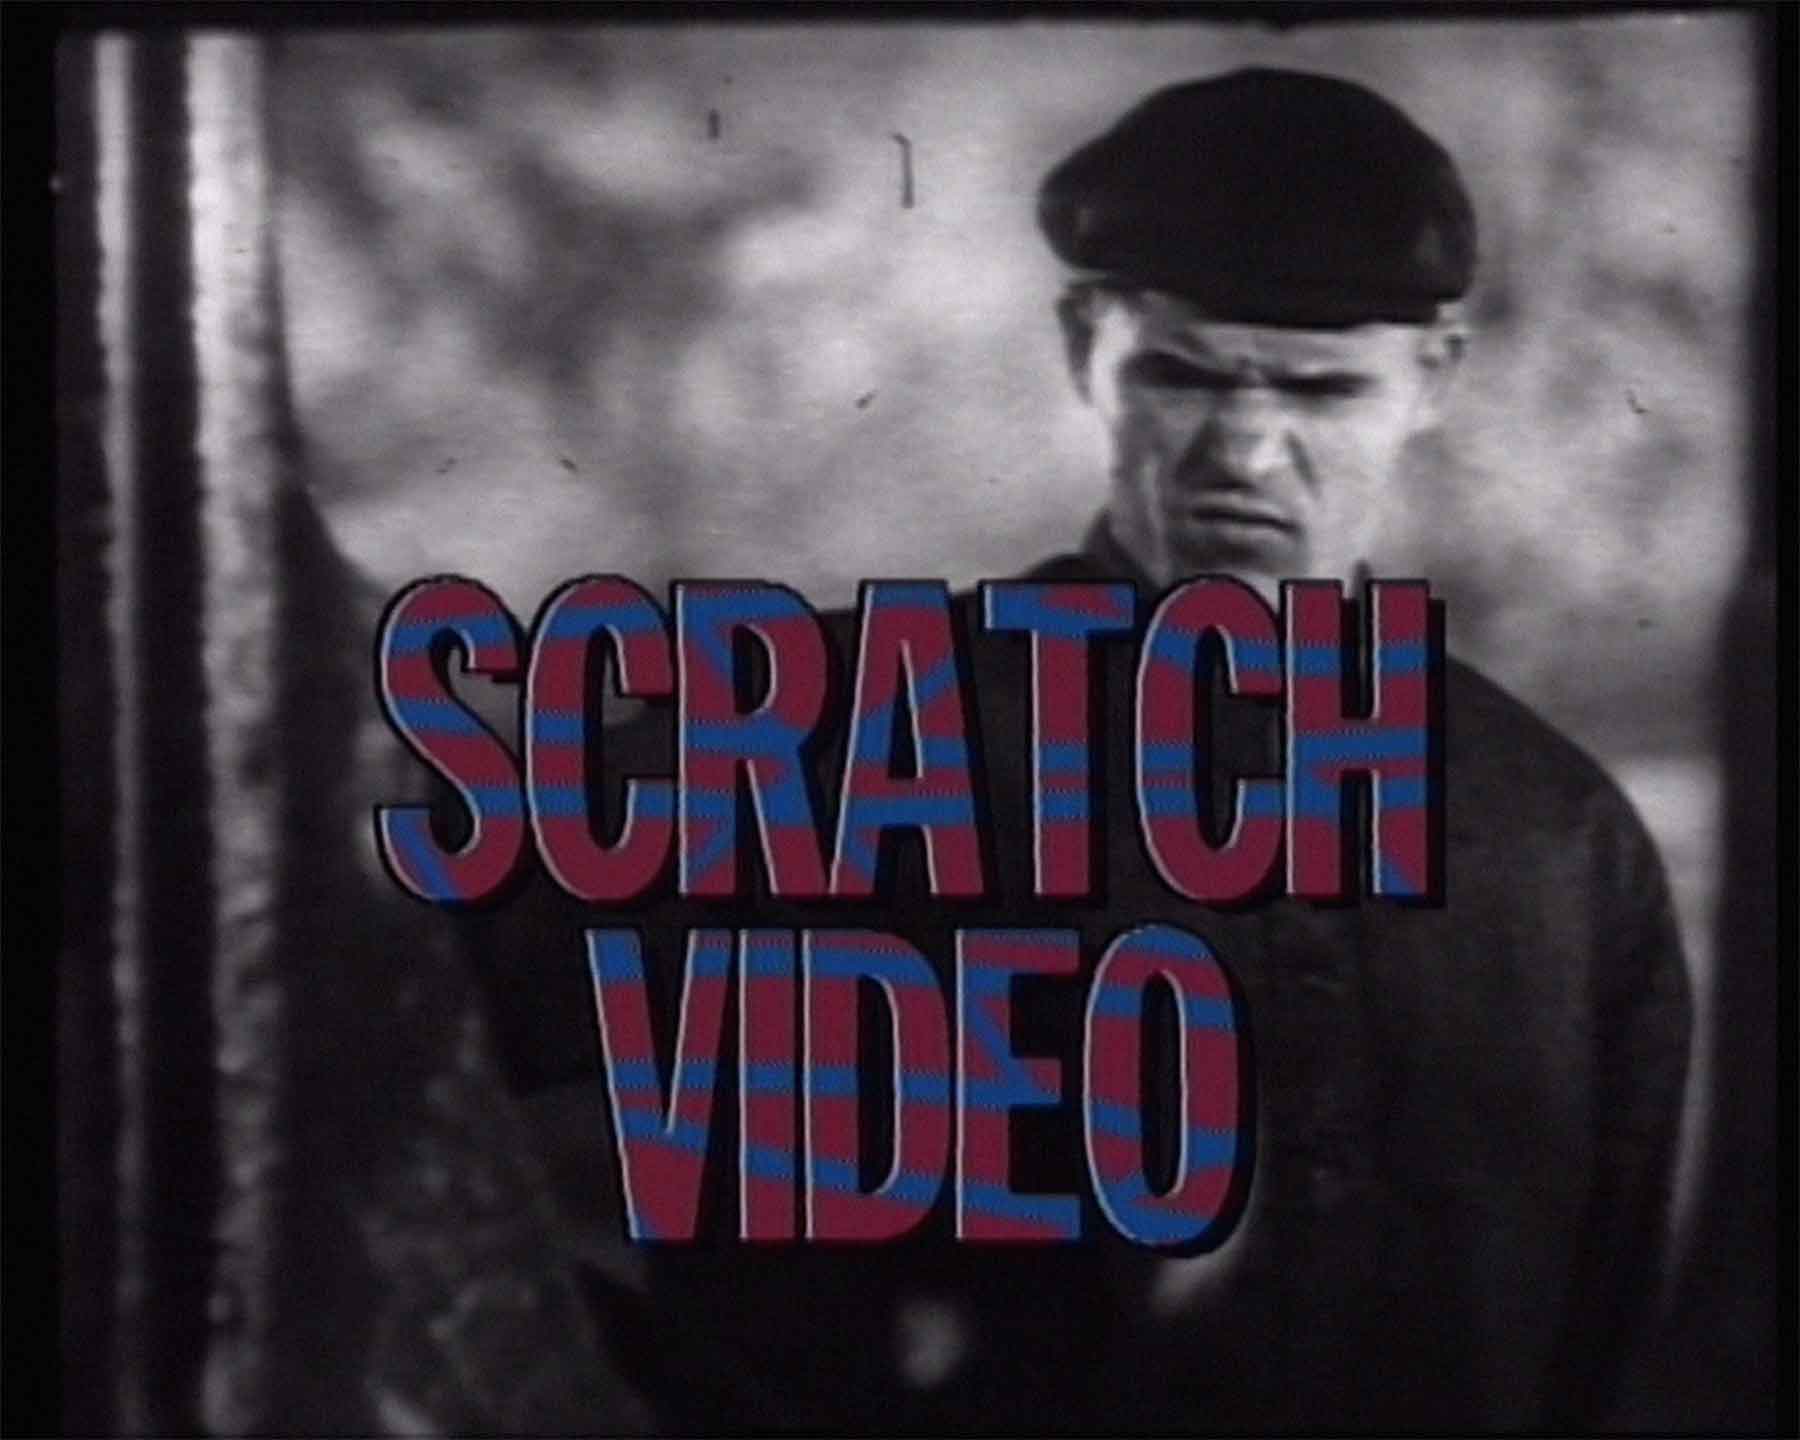 3 George Barber The Greatest Hits of Scratch Video Vol web